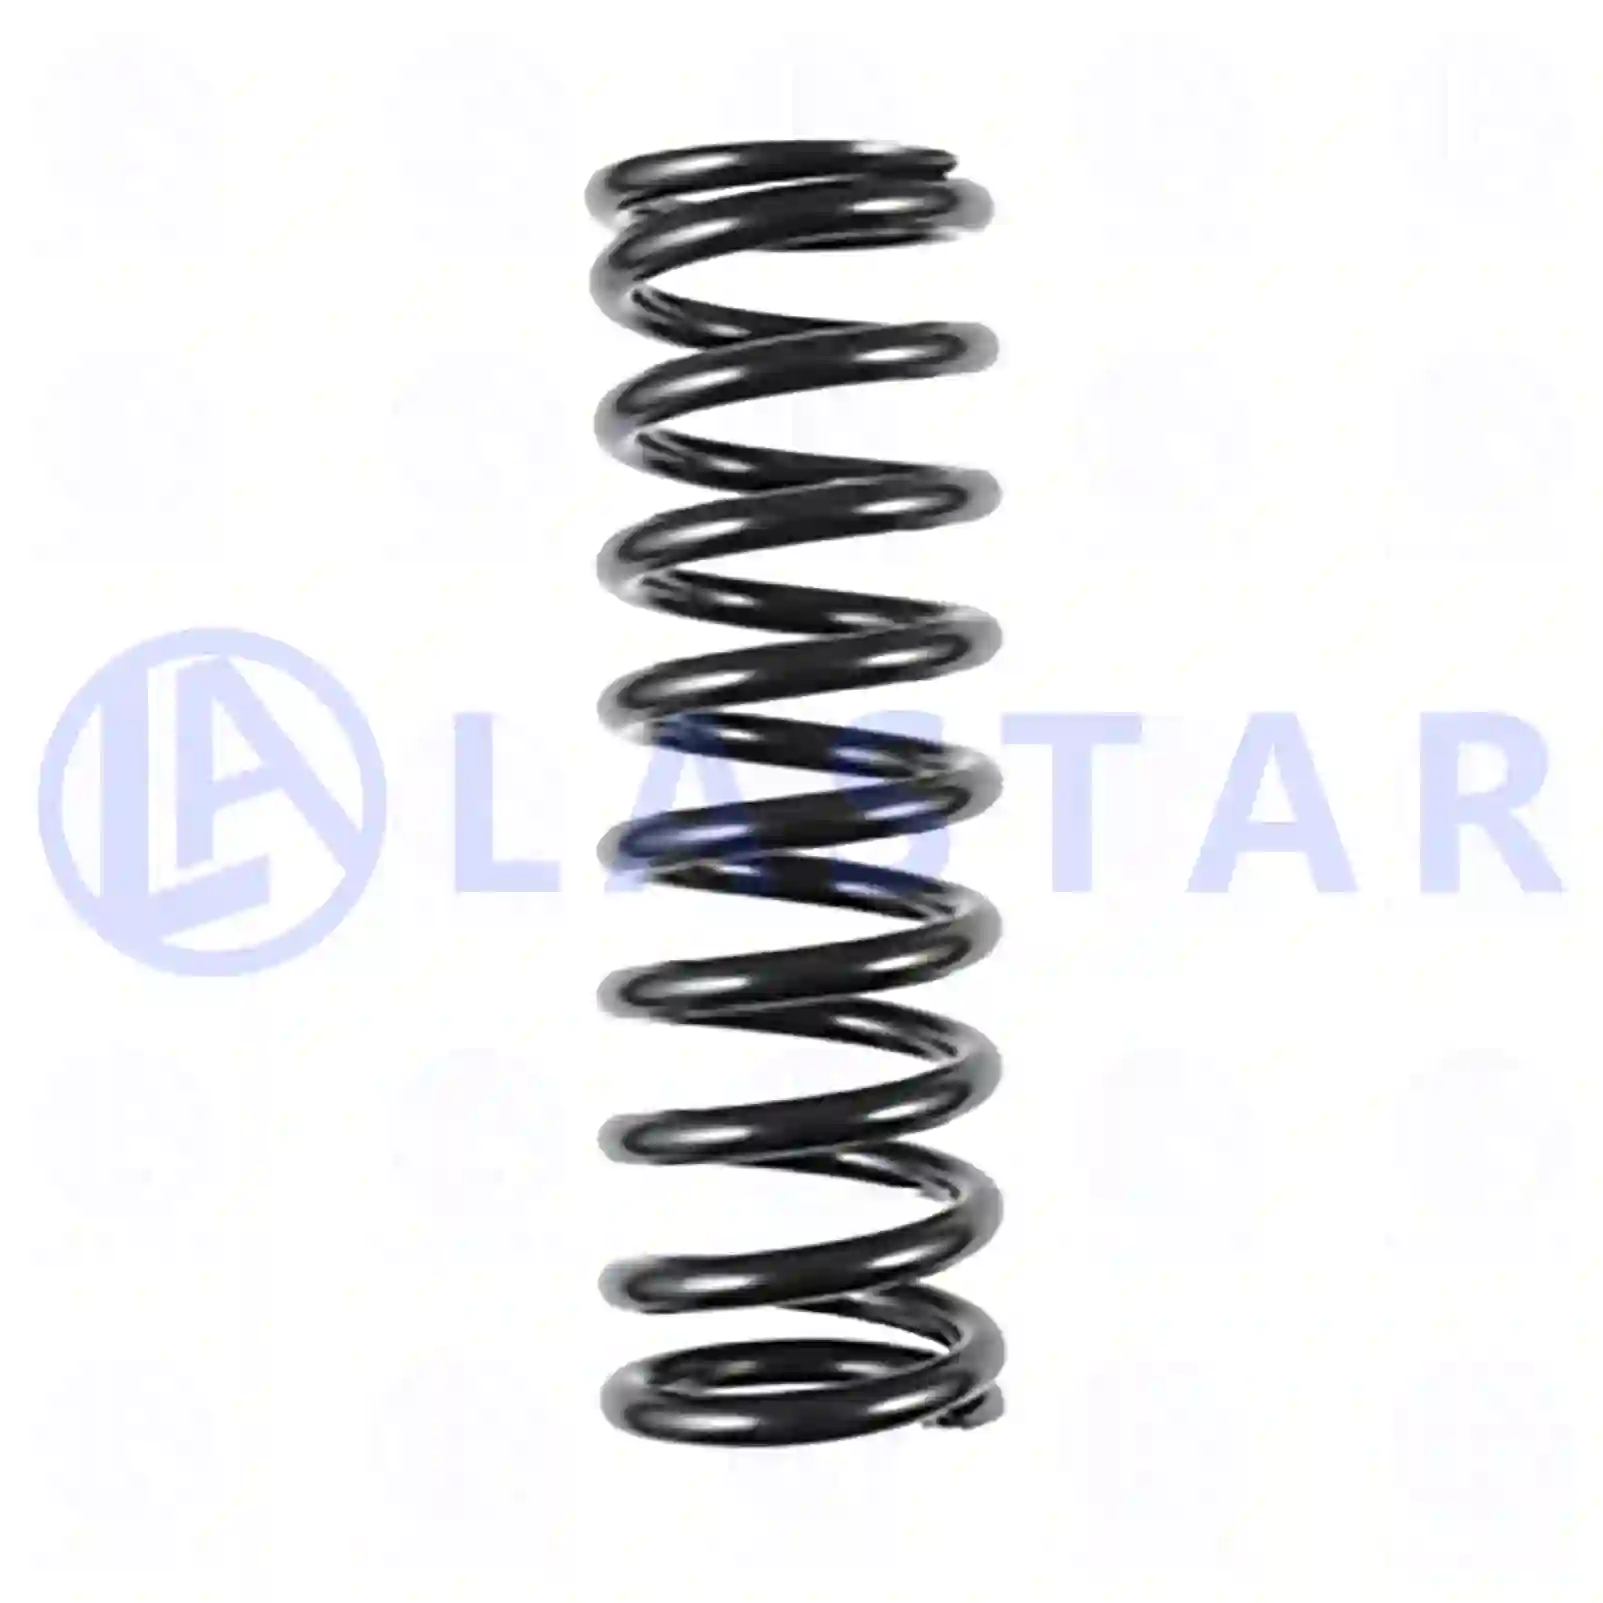 Spring, cabin shock absorber, 77735774, 1075357 ||  77735774 Lastar Spare Part | Truck Spare Parts, Auotomotive Spare Parts Spring, cabin shock absorber, 77735774, 1075357 ||  77735774 Lastar Spare Part | Truck Spare Parts, Auotomotive Spare Parts